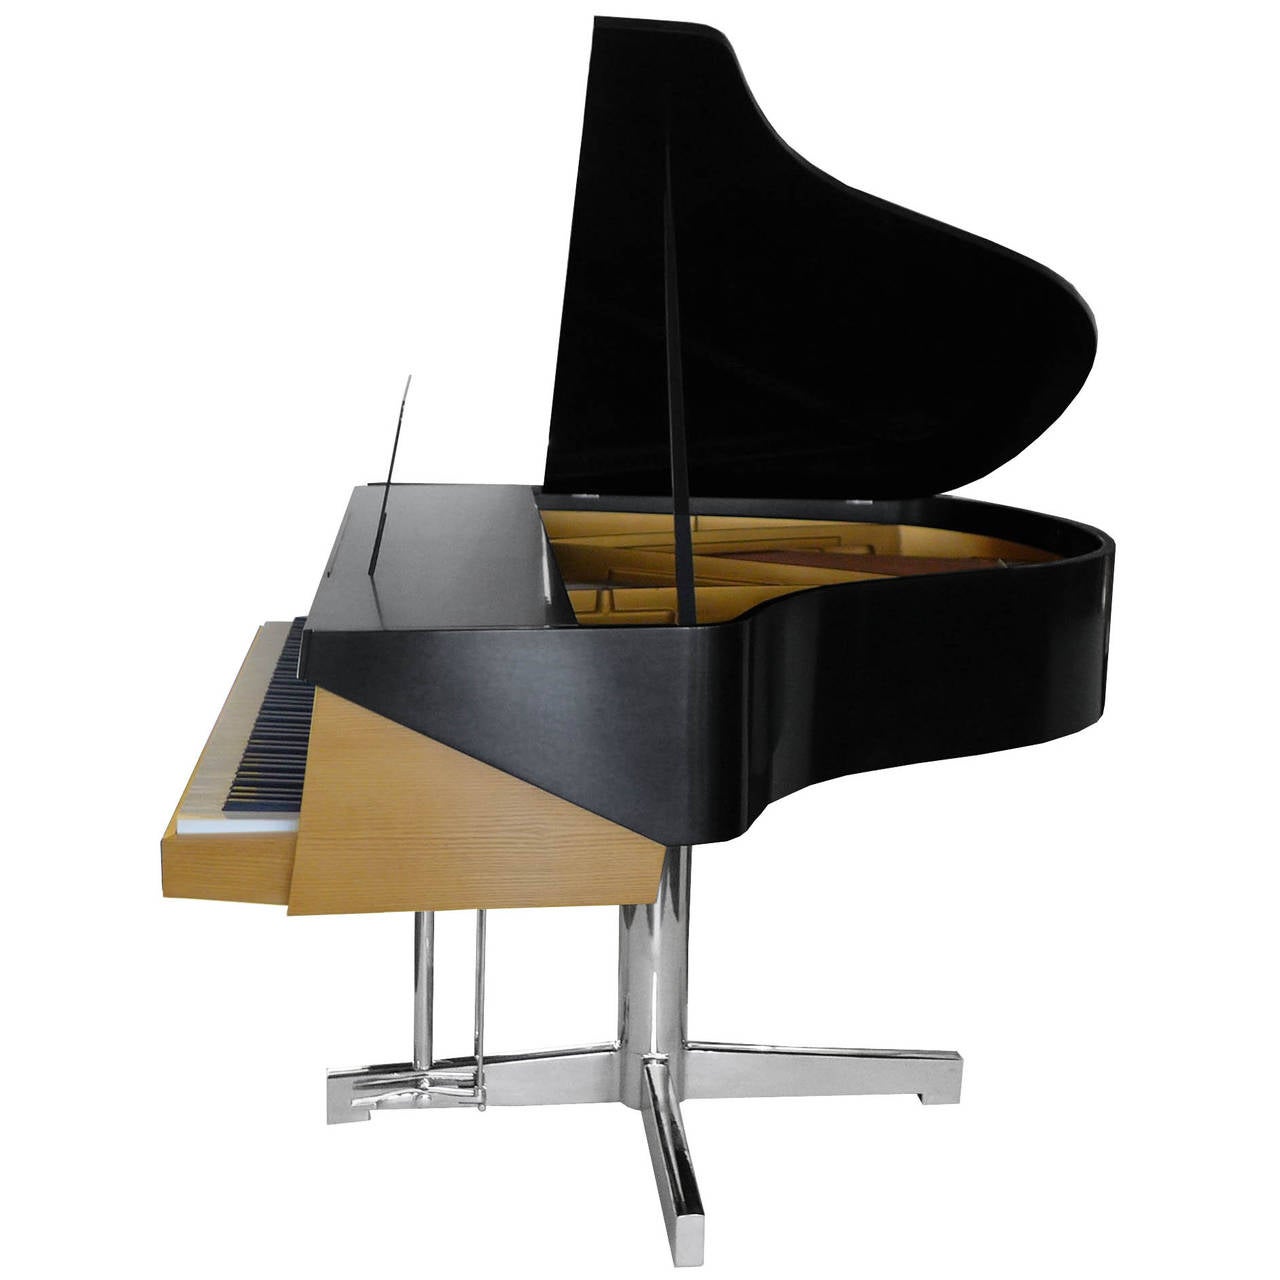 Striking modernist piano designed by architect Torben Christensen and manufactured by Andreas Christensen. Finished in a beautiful satin lacquered finish with a nickel-plated pedestal base and fittings. The clear glass music stand adds a Minimalist